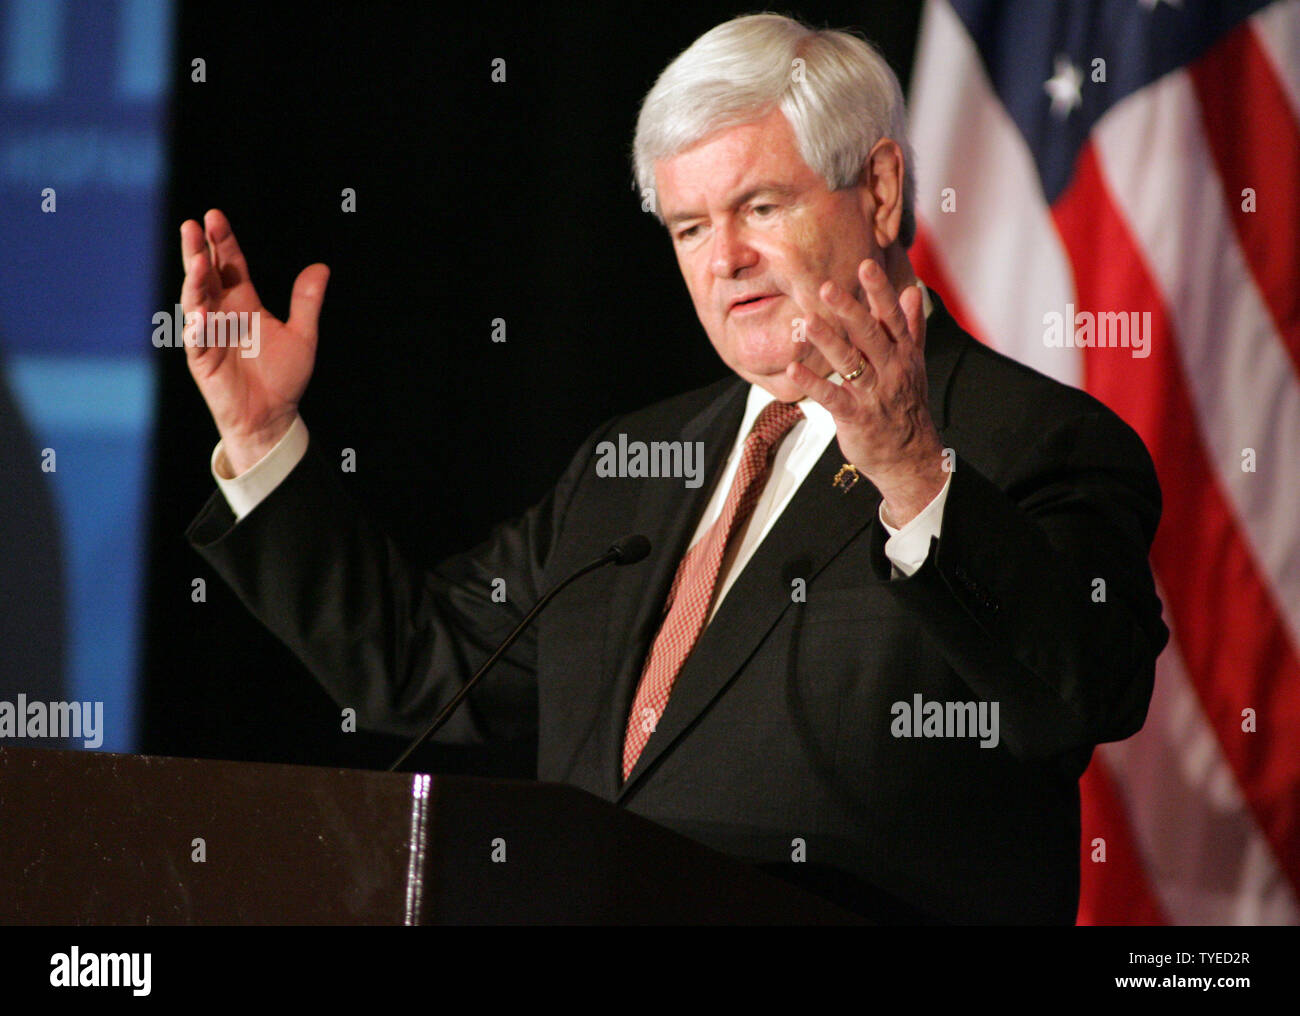 Republican Presidential hopeful Newt Gingrich speaks at the Hispanic Leadership Network conference at the Doral Golf Resort and Spa in Miami on January 27, 2012. UPI/Michael Bush Stock Photo